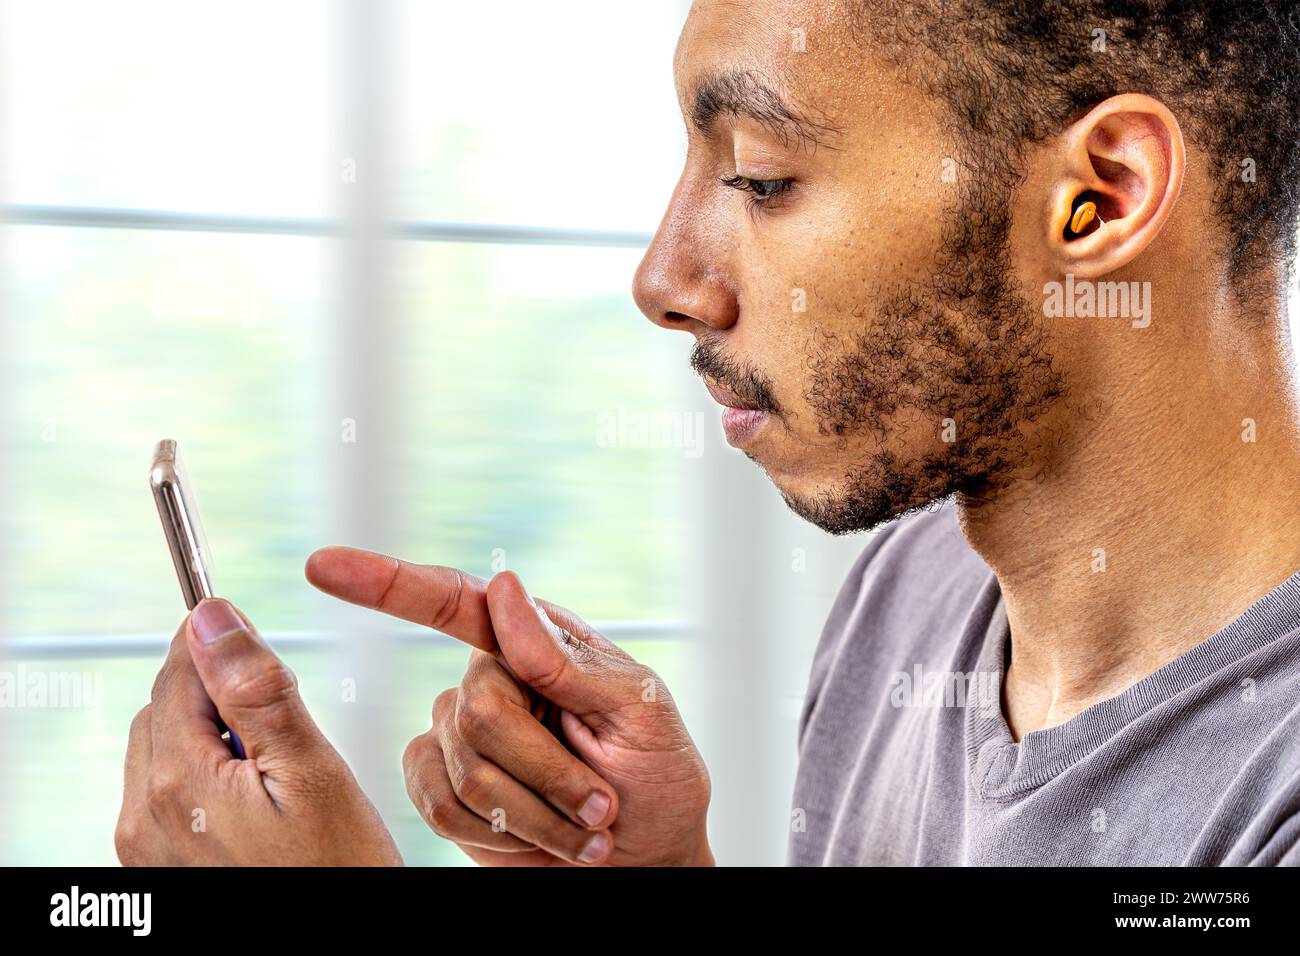 Young man adjusting the volume intensity of the hearing aid with the smartphone. Stock Photo